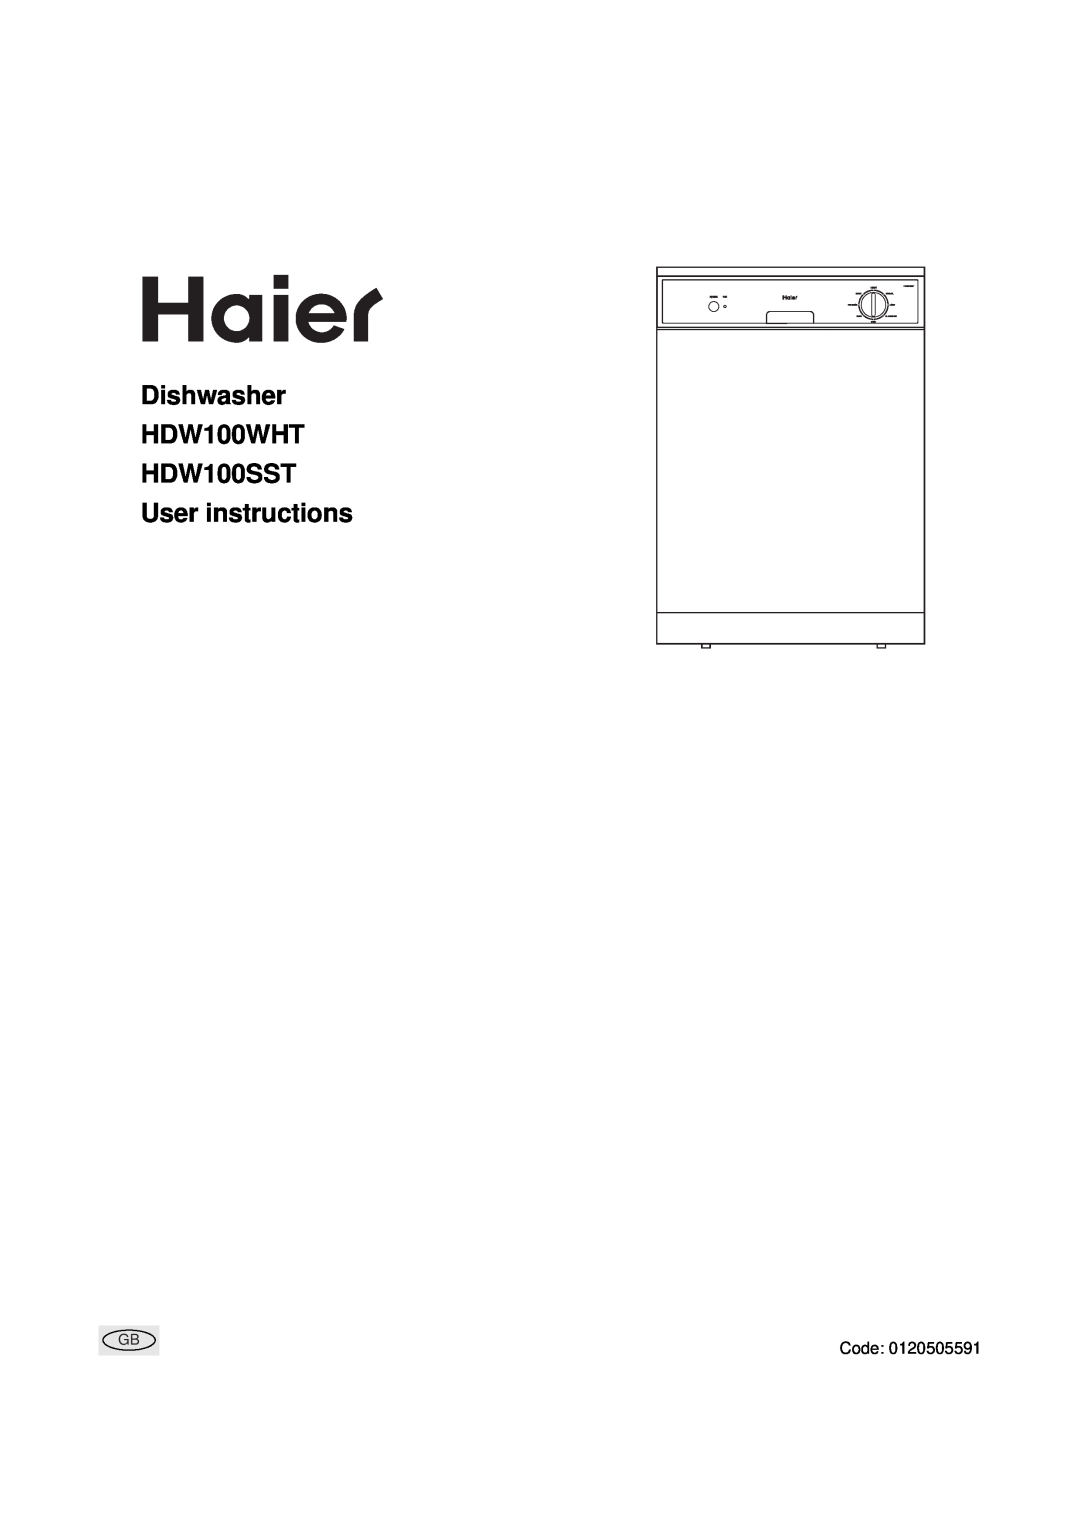 Haier manual Dishwasher HDW100WHT HDW100SST User instructions, Code 